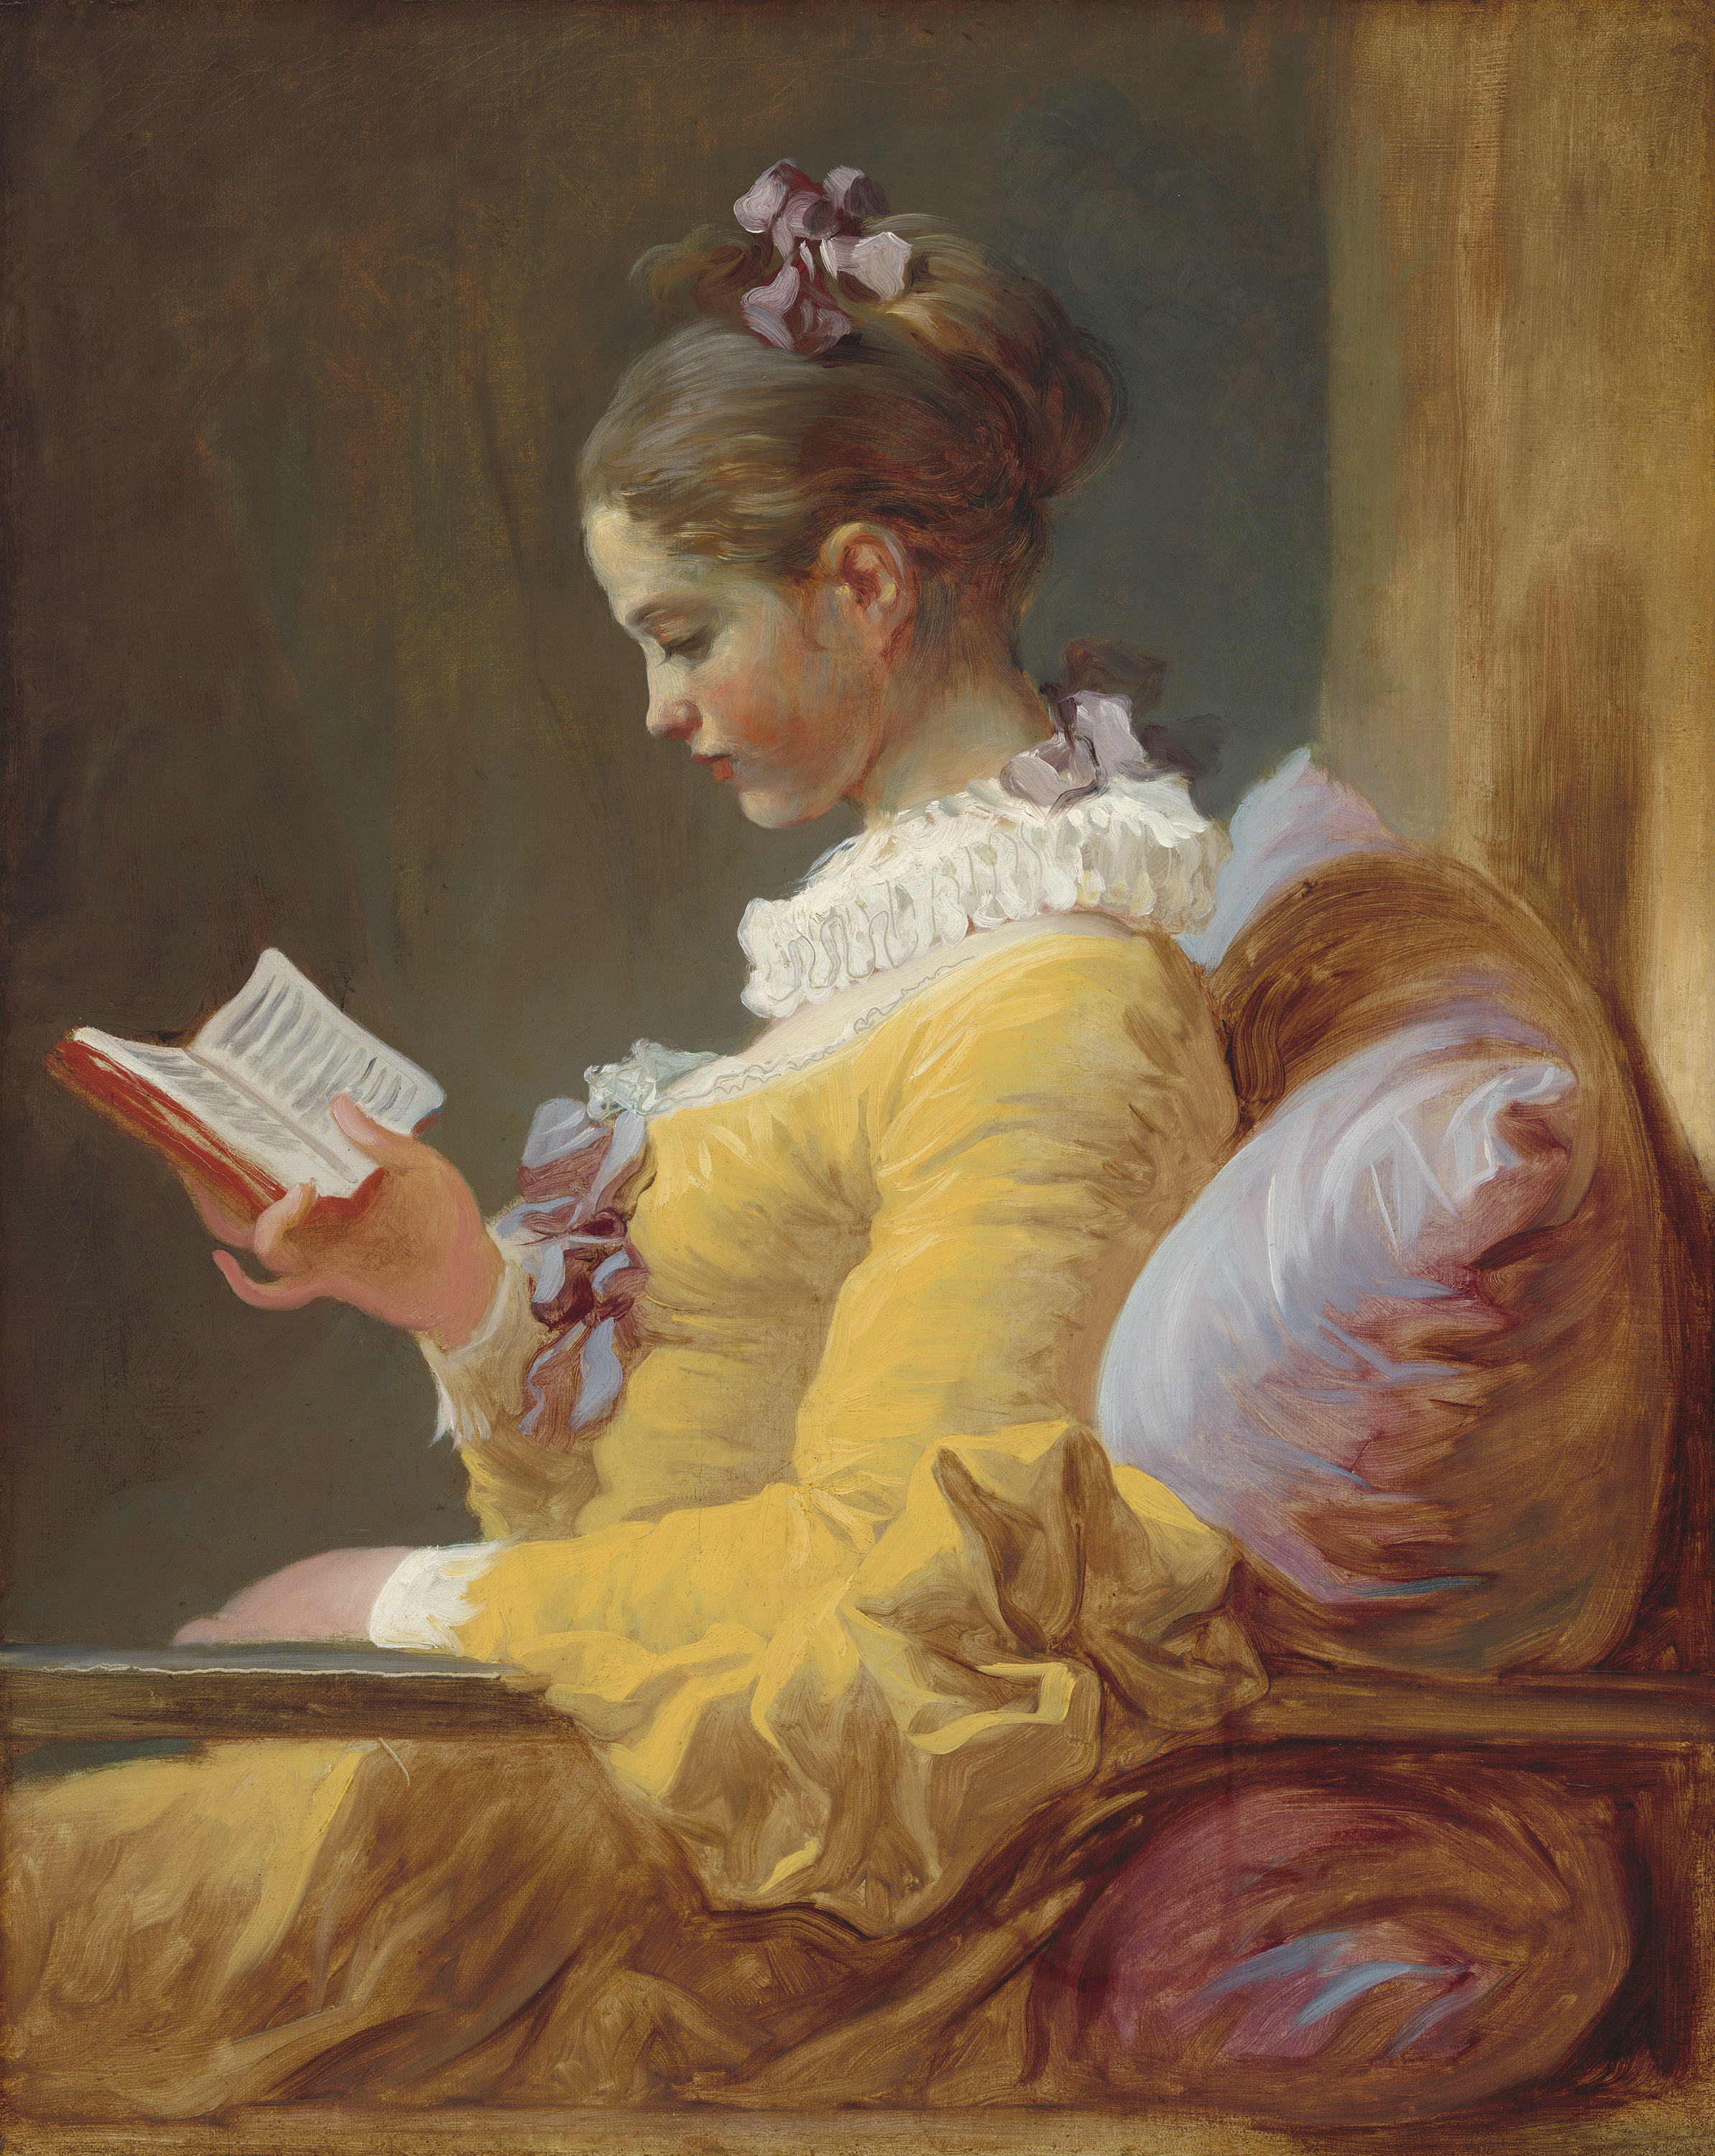 Young Girl Reading by Jean-Honoré Fragonard - c. 1770 - 81.1 x 64.8 cm National Gallery of Art